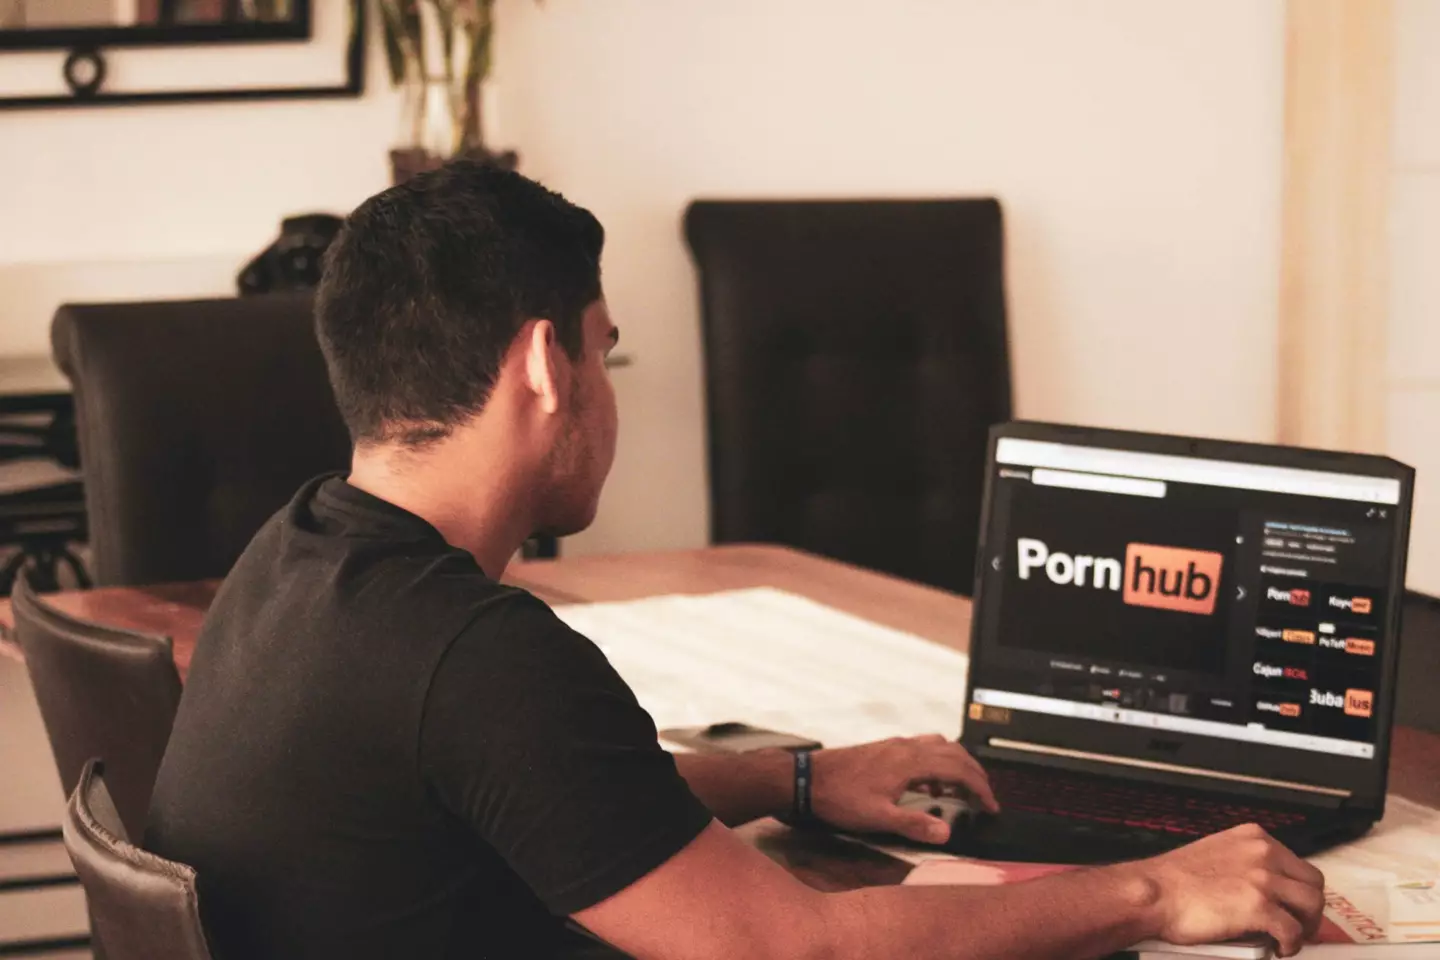 Pornhub had to make the difficult decision to block access to the porn site.